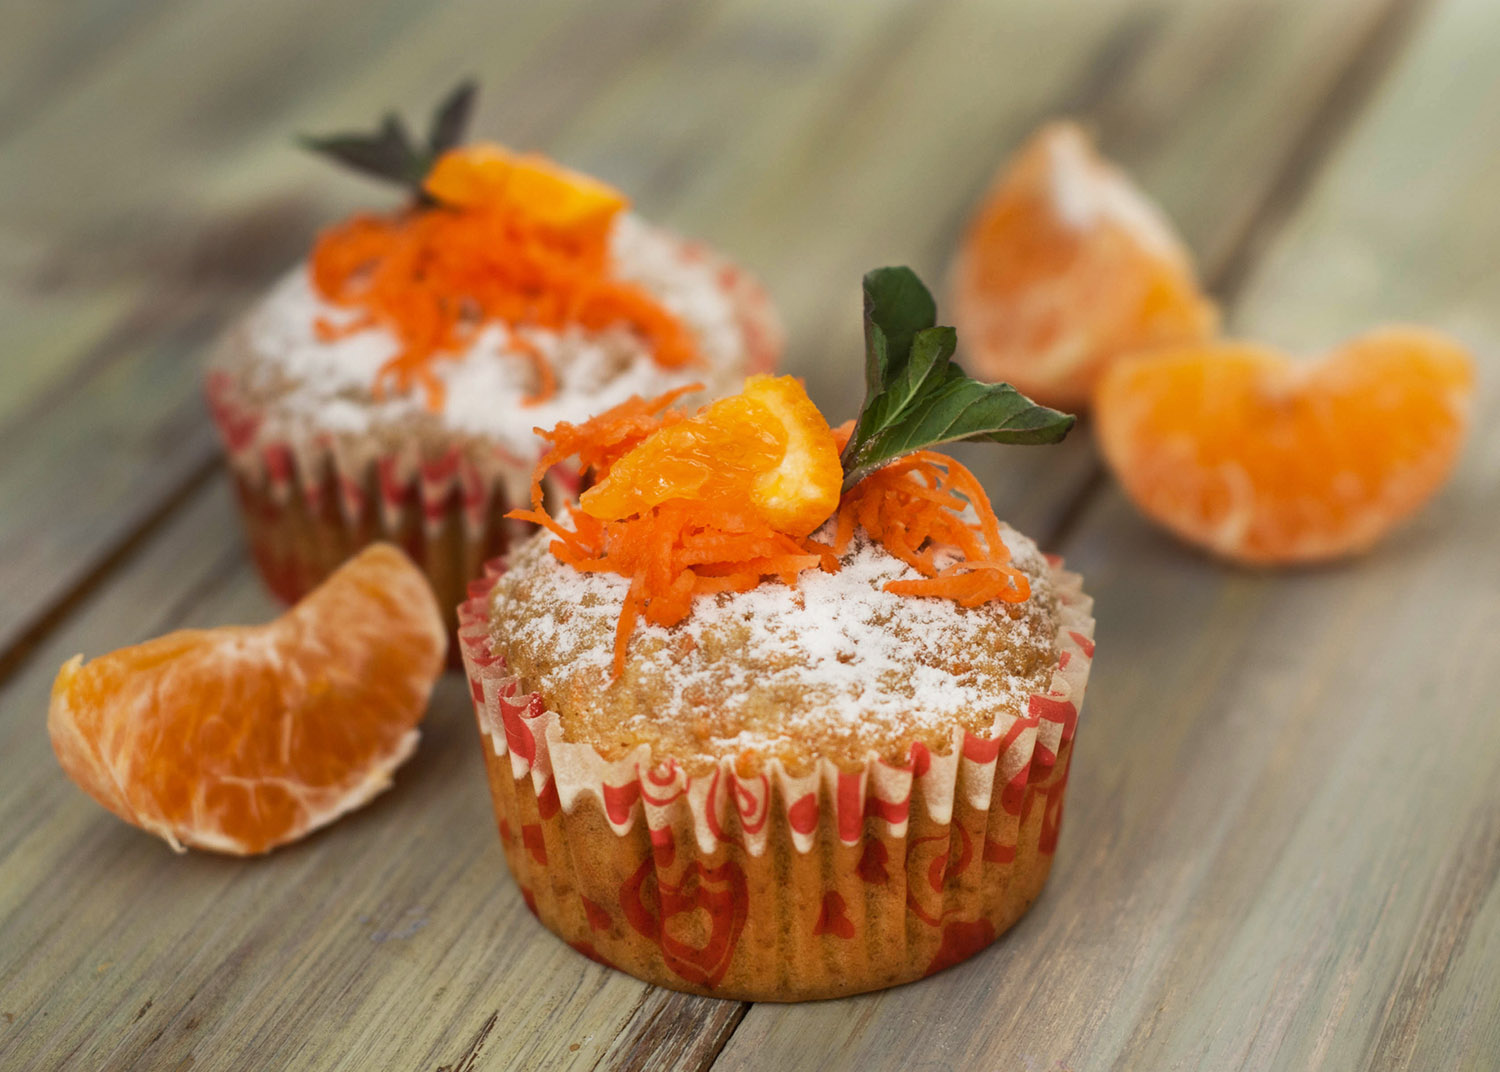 Carrot Healthy Muffins Cupcakes Buns on a WoodenRustic board. Homemade bakery